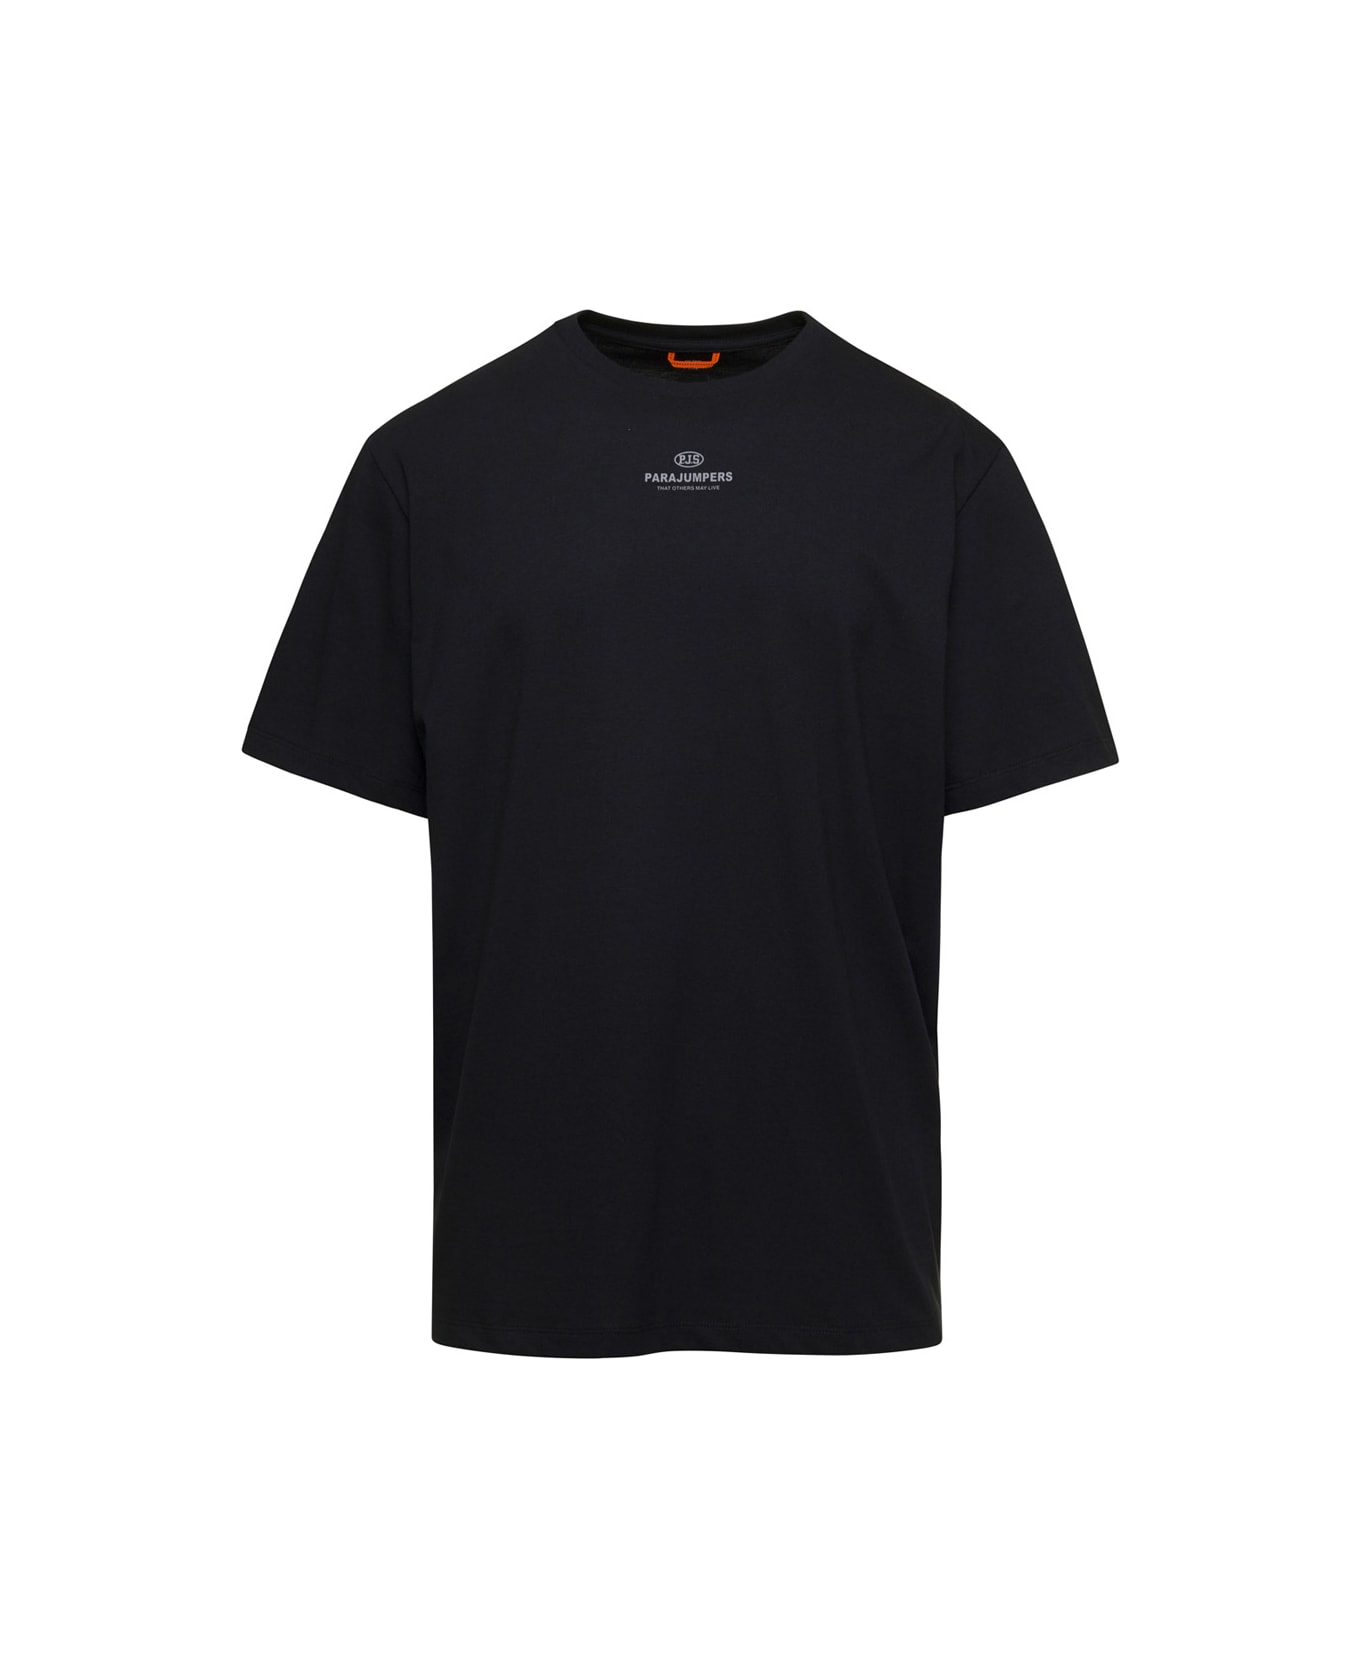 Parajumpers Black Crewneck T-shirt With Contrasting Logo Print In Cotton Man - Black